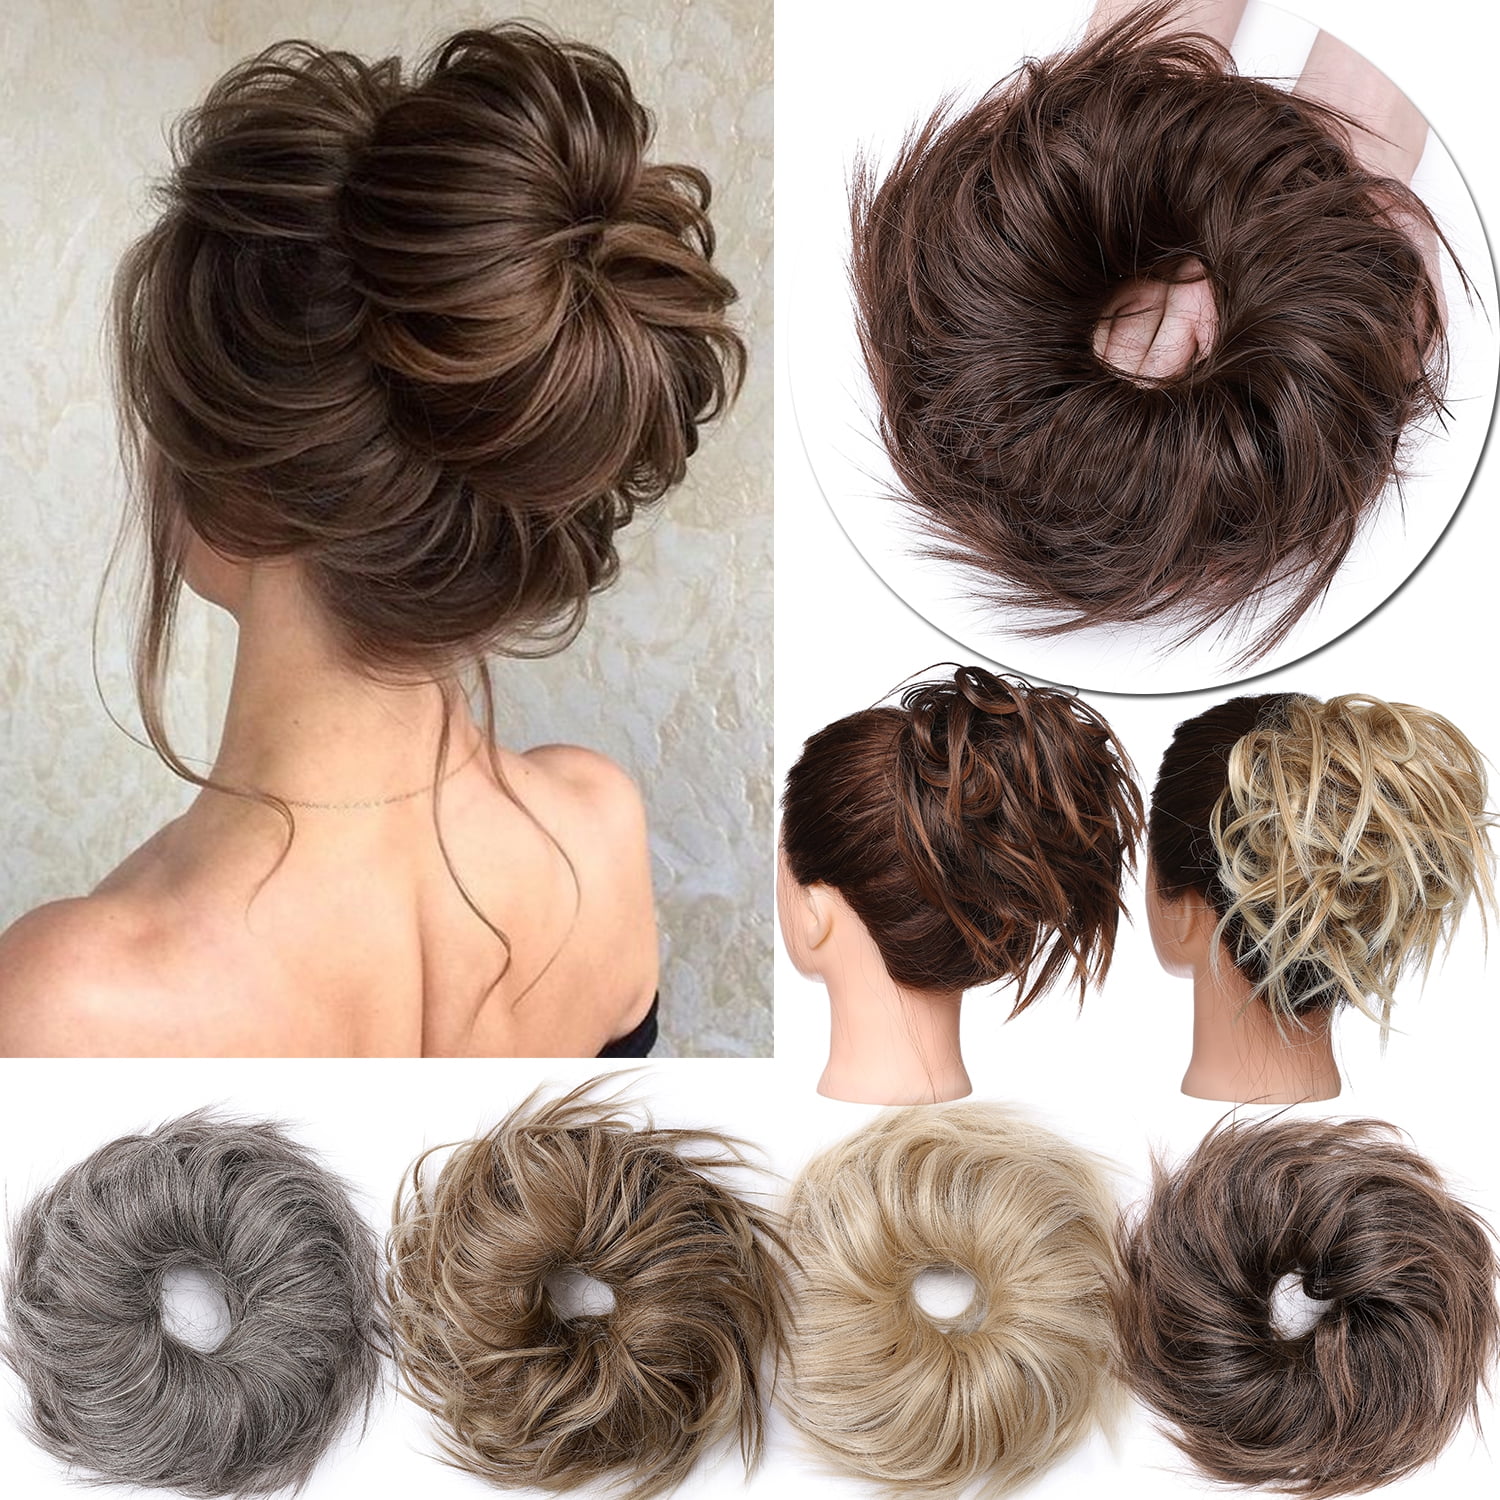 Real Natural Curly Messy Bun Hair Piece Scrunchie Thick Fake Hair Extension Hot 